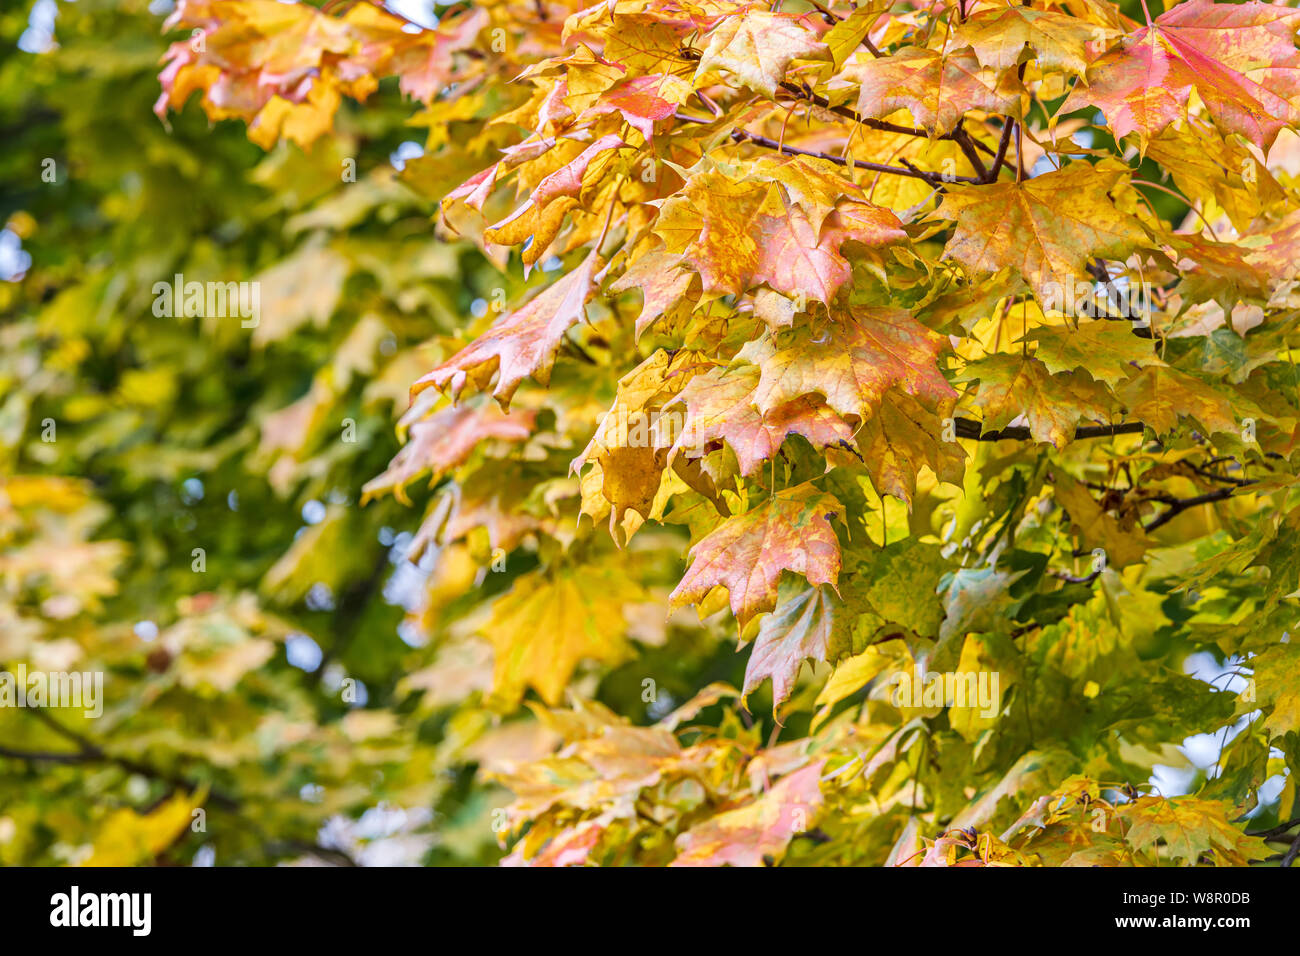 maple tree with lush foliage of red and orange color in autumn season. closeup view Stock Photo